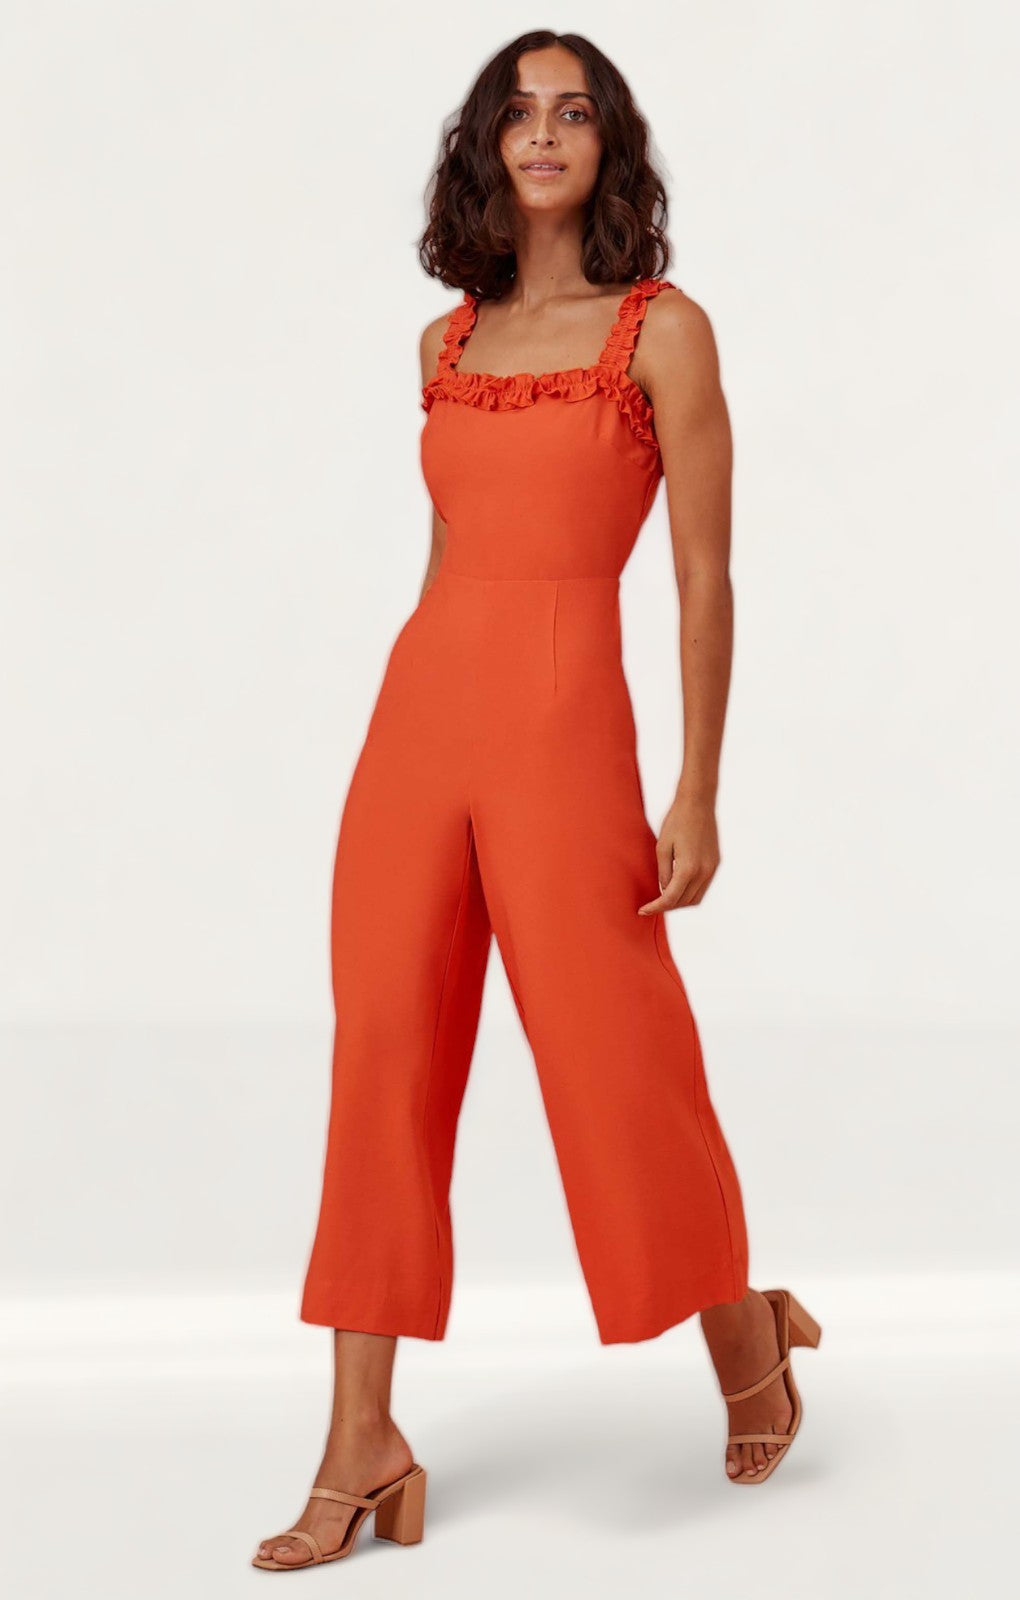 Finders Keepers Chiquita Pantsuit product image